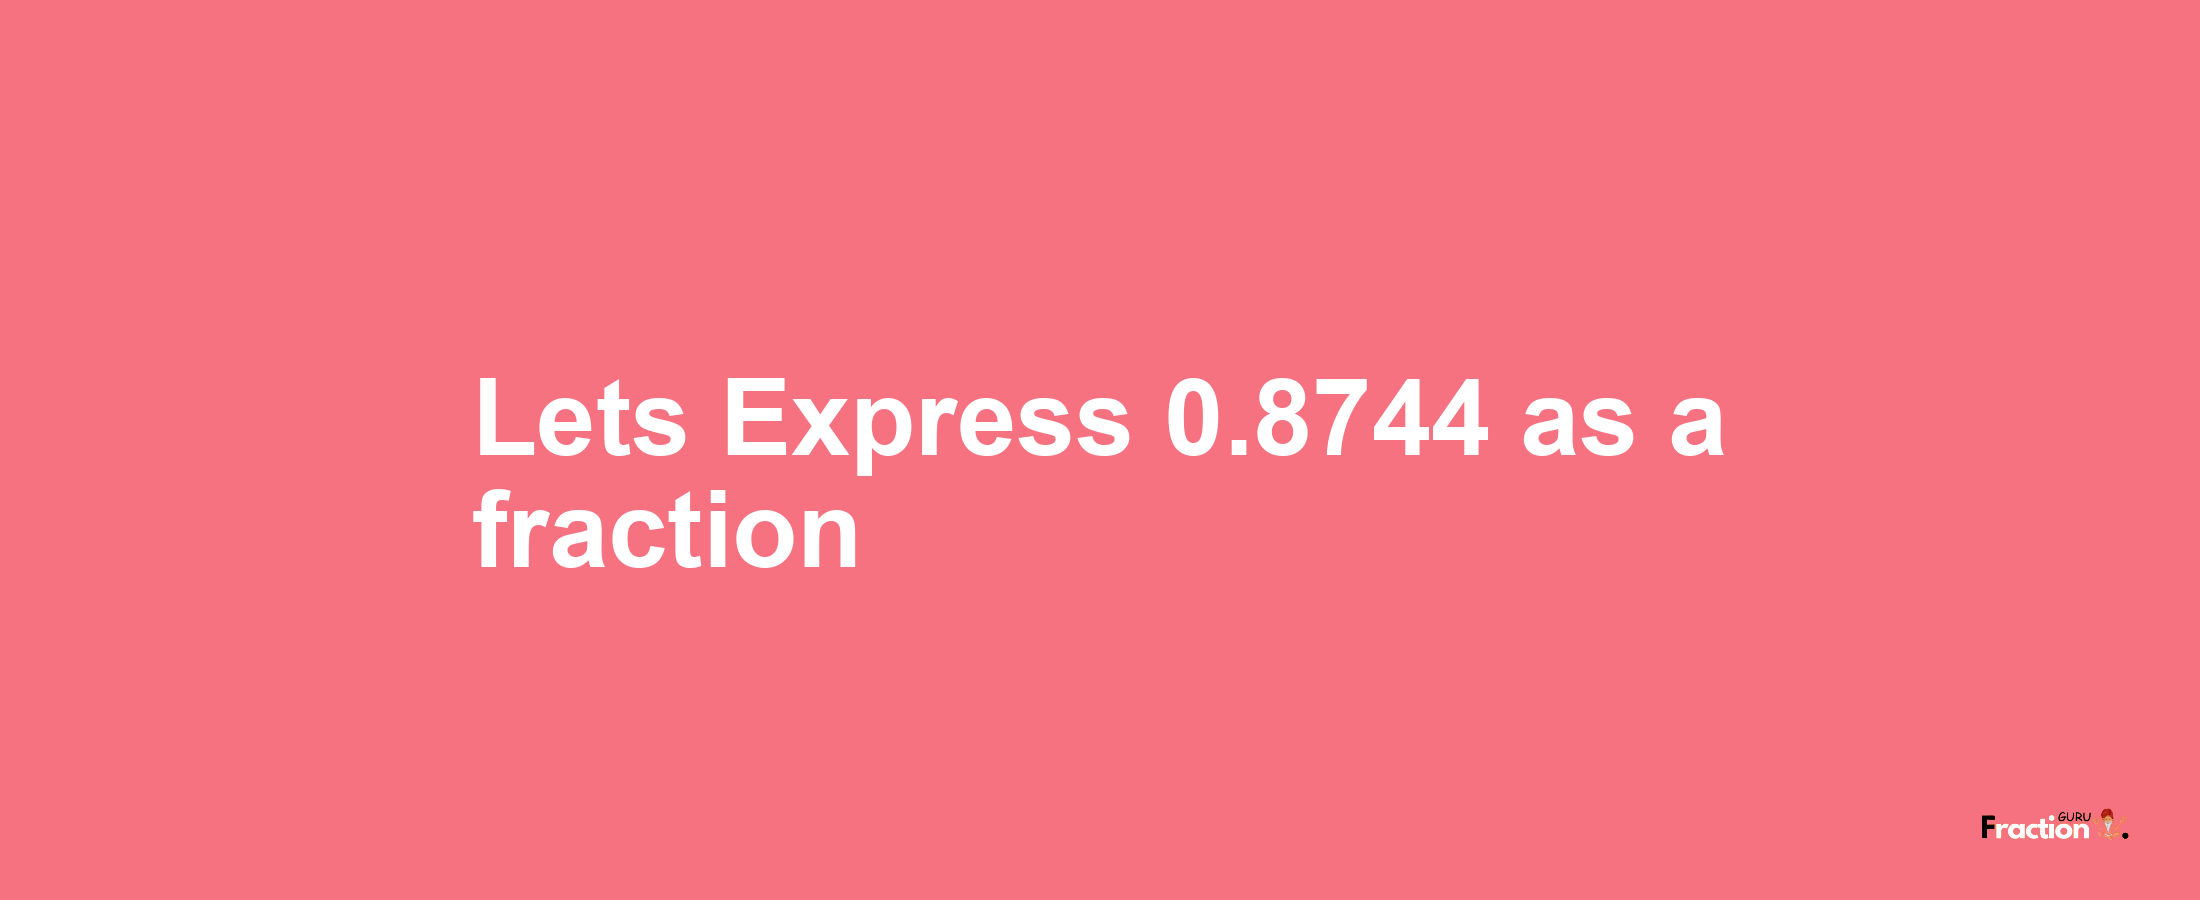 Lets Express 0.8744 as afraction